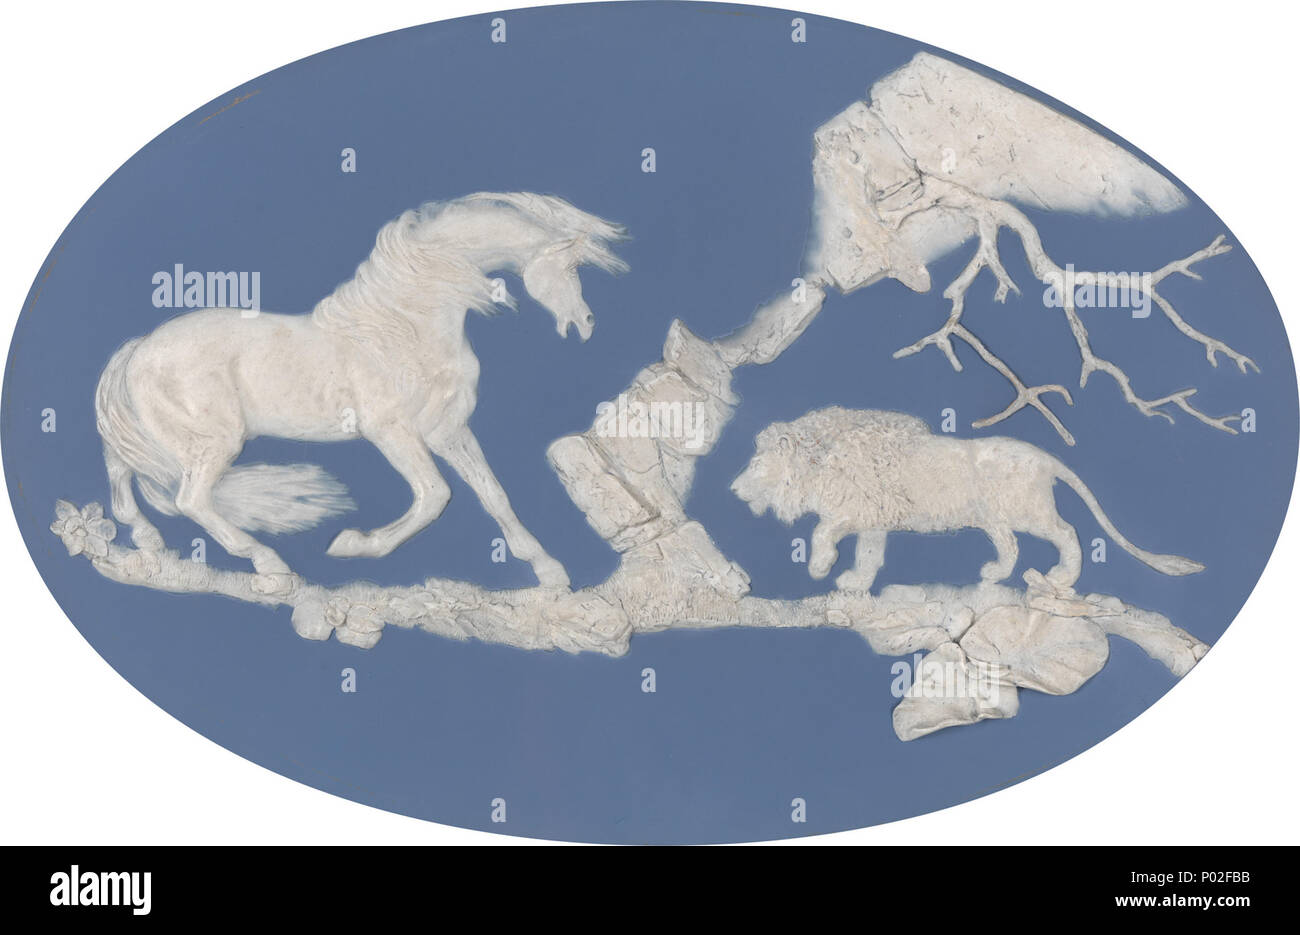 B2001.2.359 . 25 February 2011, 09:46:51. Josiah Wedgwood, Thomas Bentley (after George Stubbs) 11 Horse Frightened by a Lion by Josiah Wedgwood Stock Photo